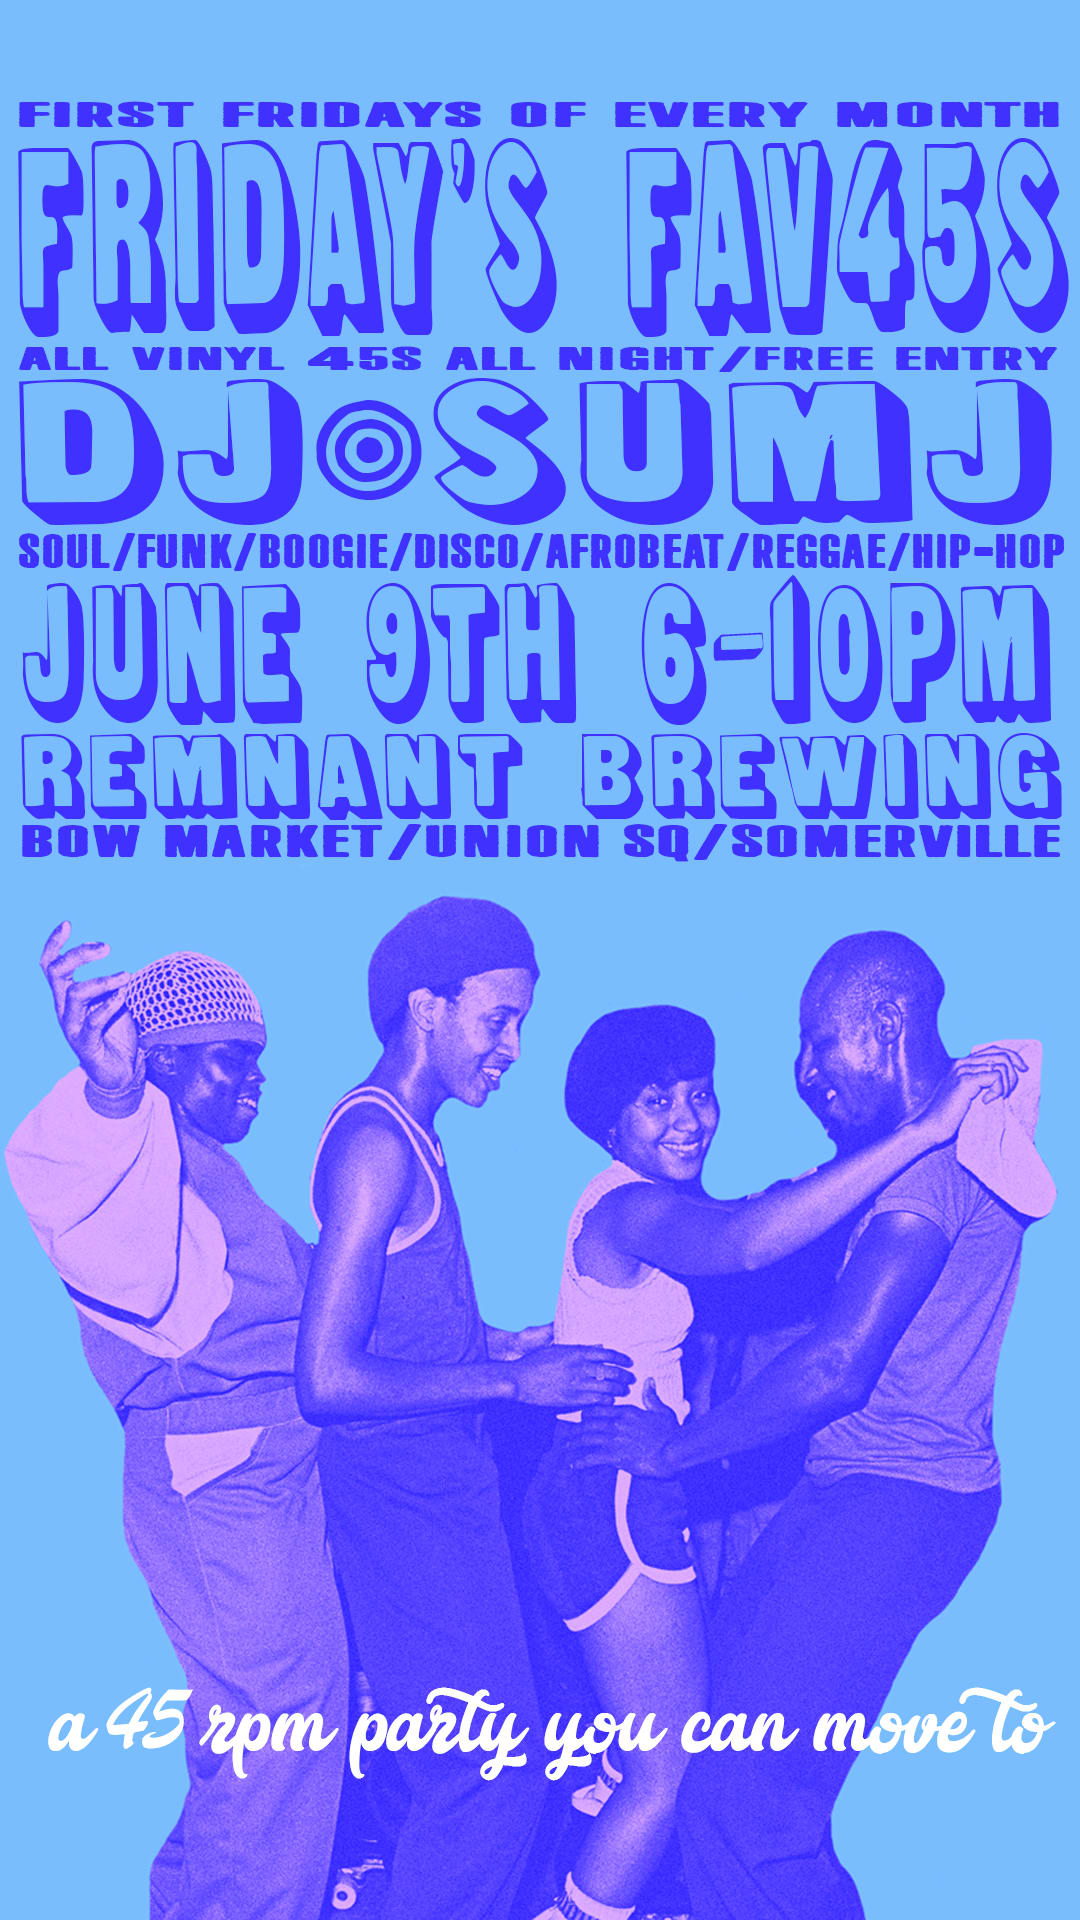 Friday's FAV45s @ Remnant Brewing [06/09/23]